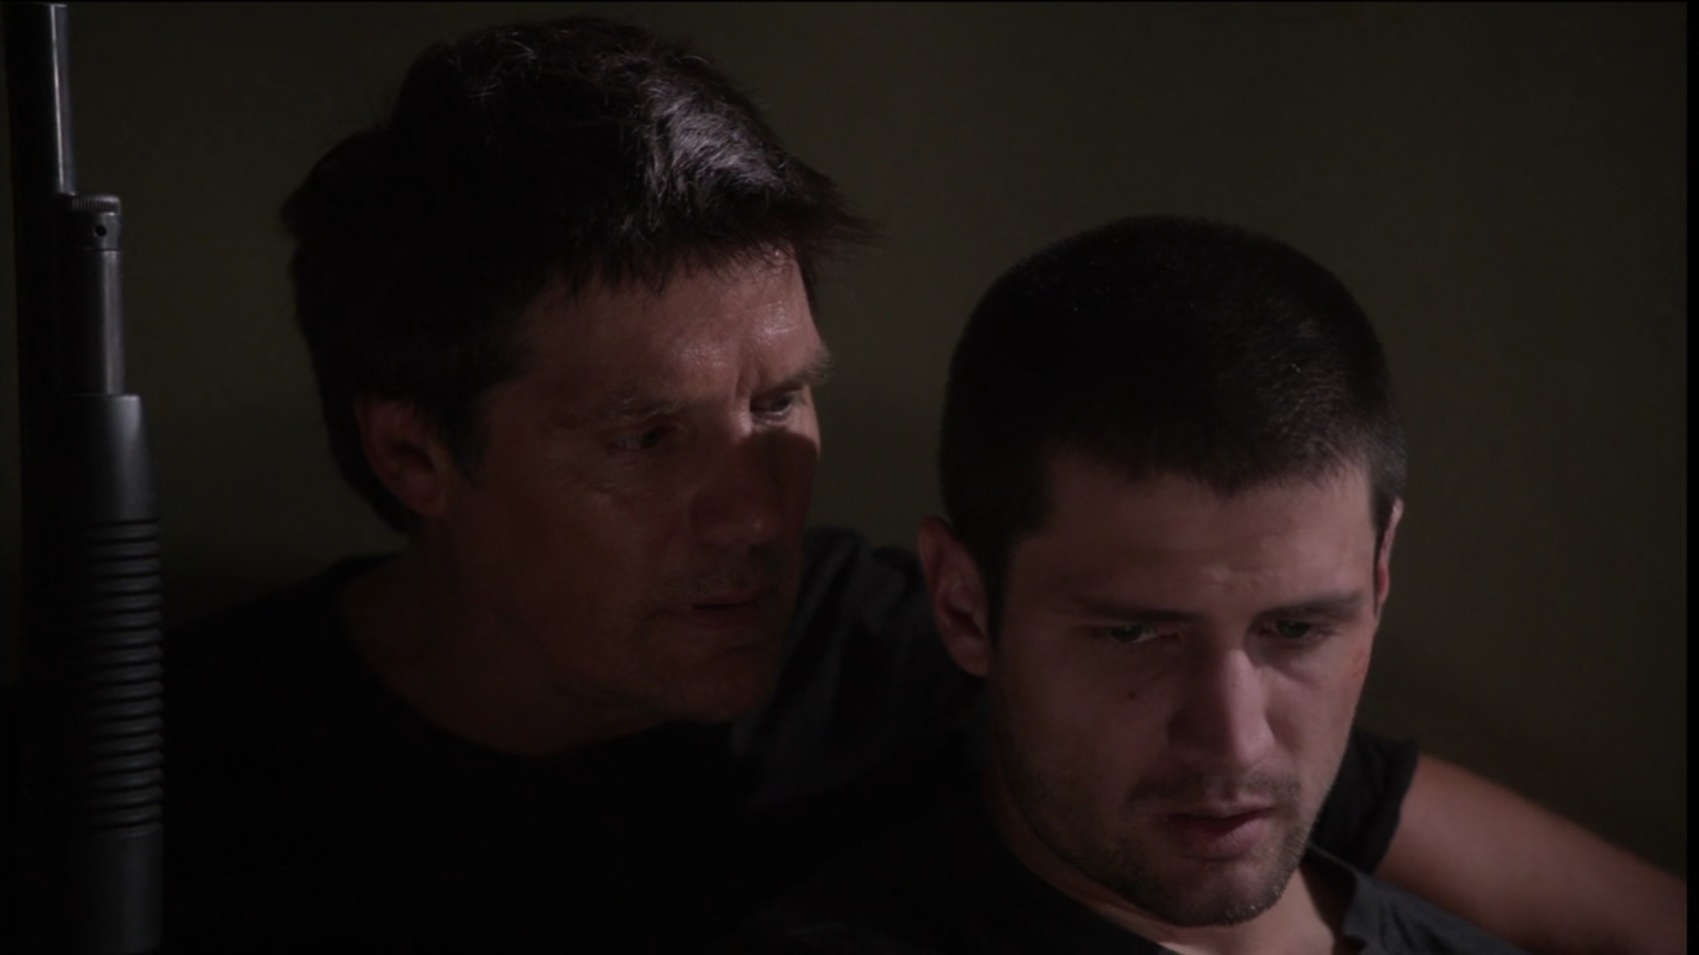 A father holds his distressed adult son in this image from Tollin/Robbins Productions.